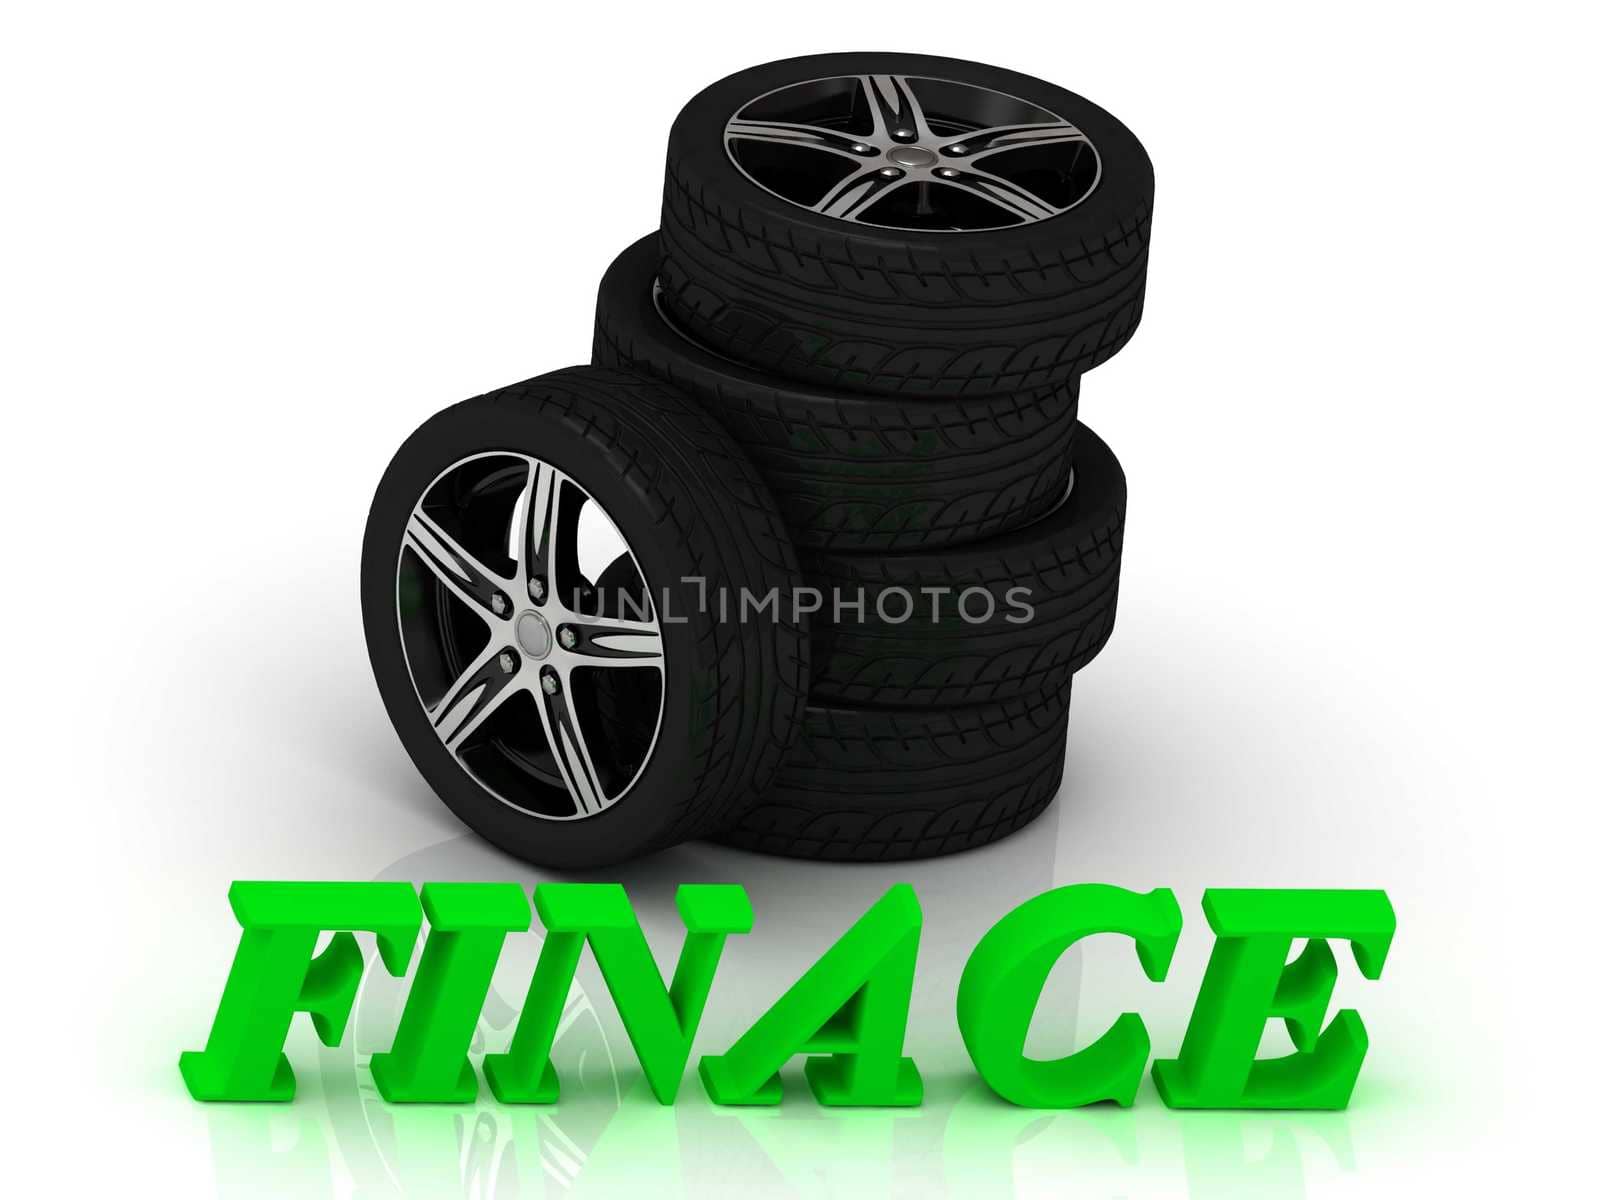 FINACE- bright letters and rims mashine black wheels on a white background